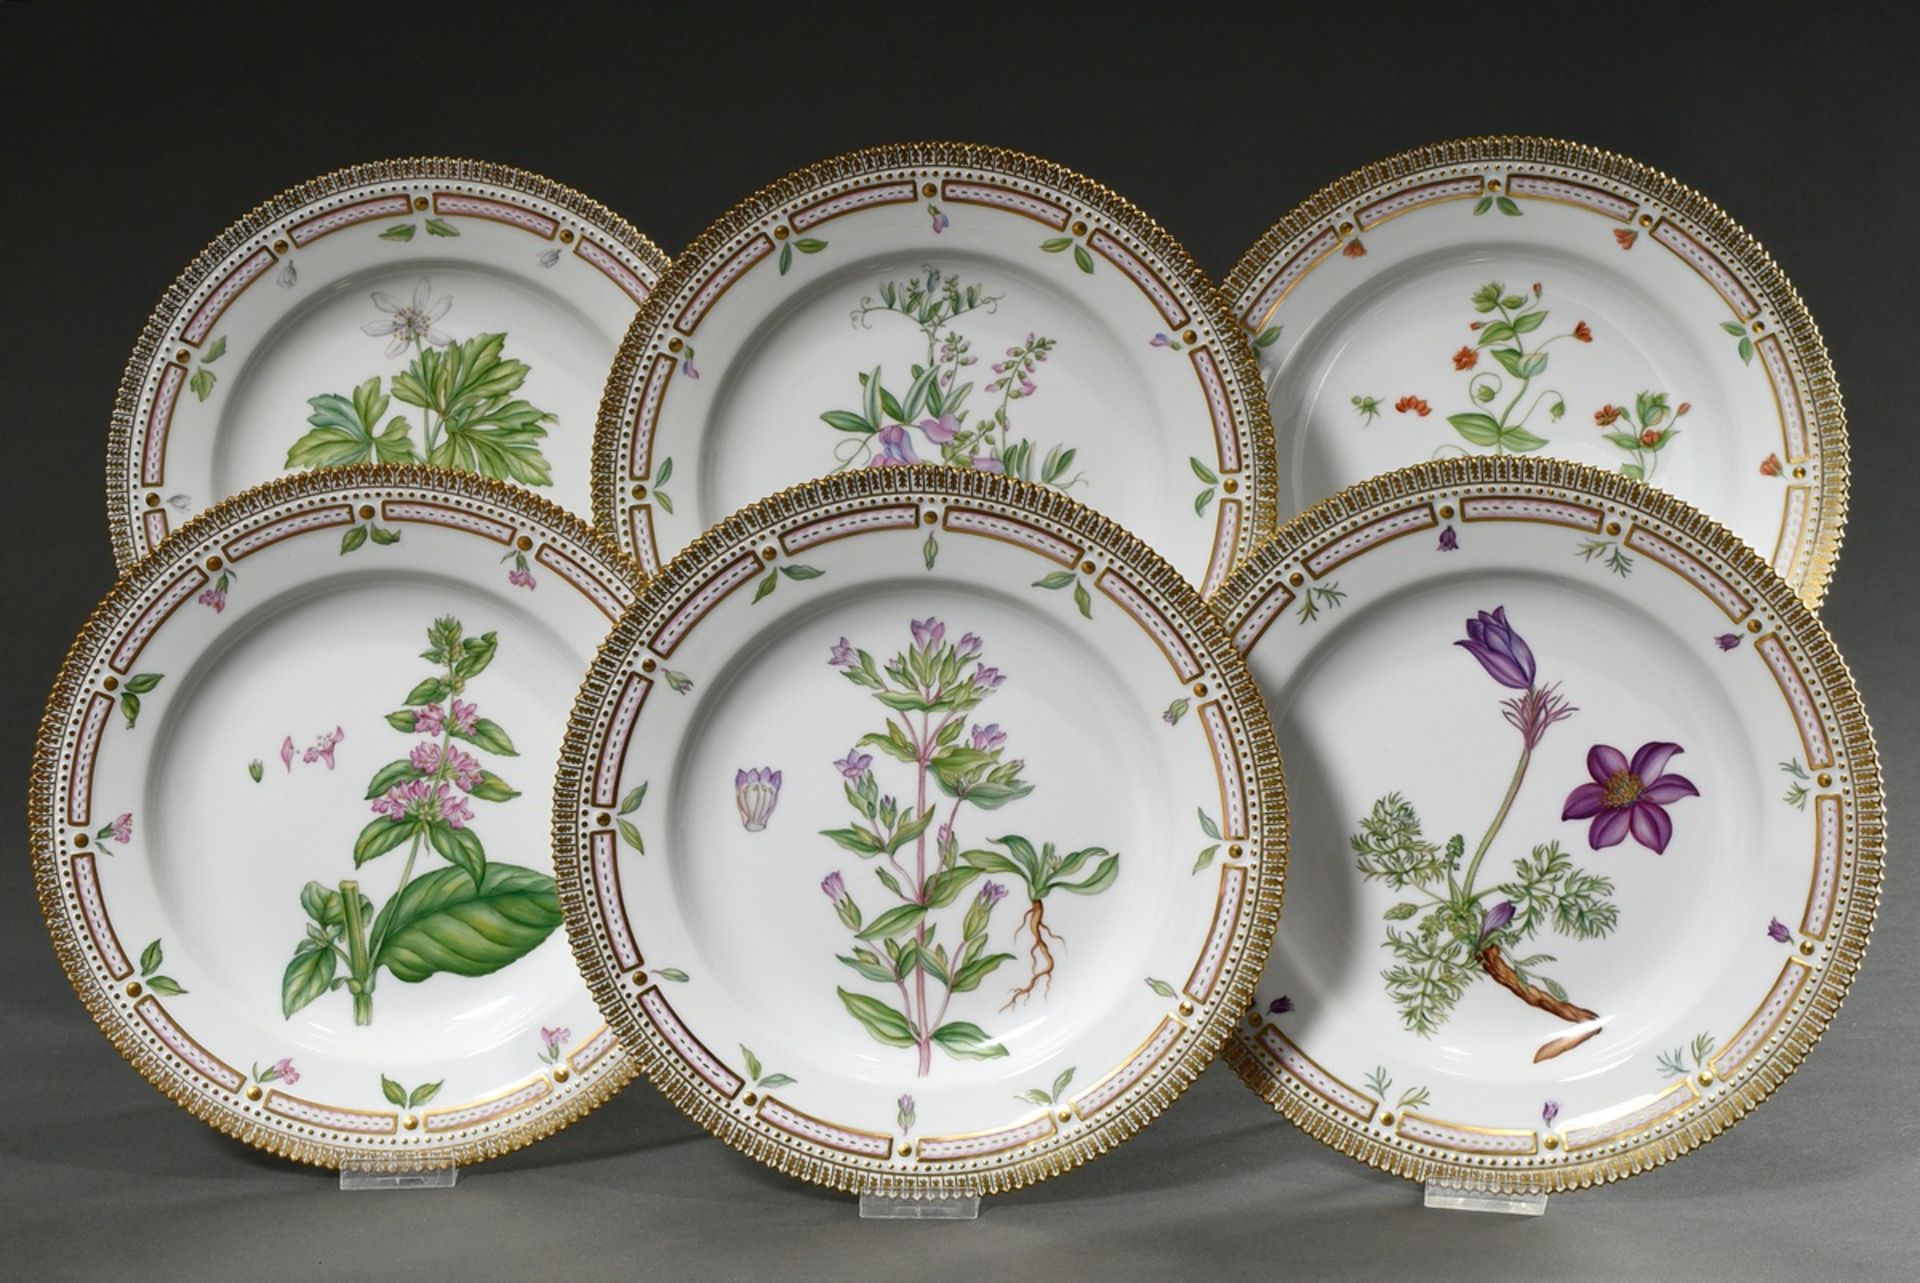 6 Royal Copenhagen "Flora Danica" dinner plates with polychrome painting in the mirror and gold dec